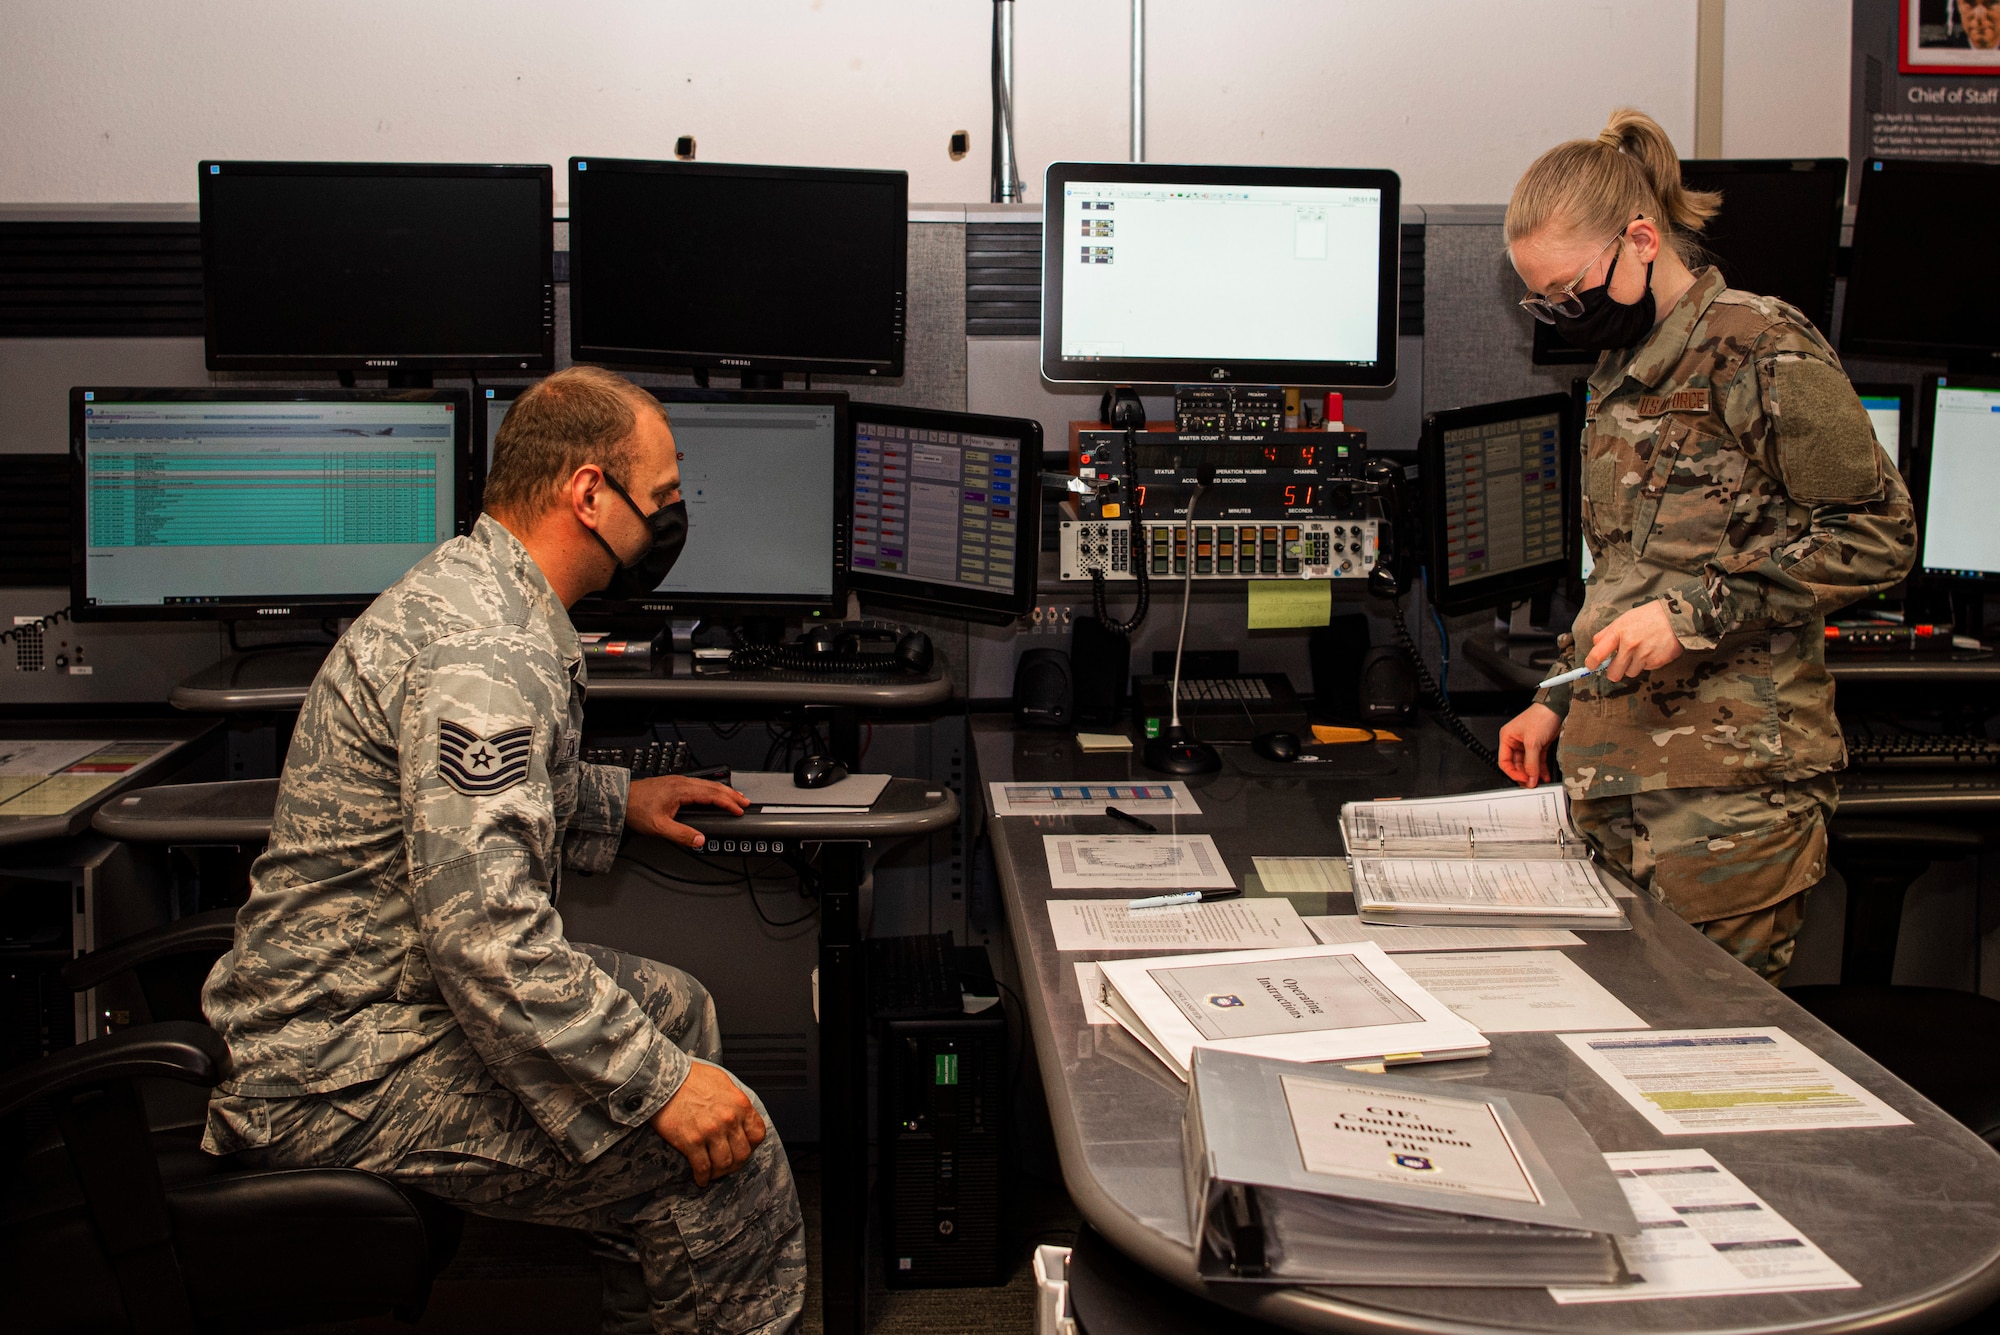 Tech. Sgt Gregory Forte, 30th Space Wing senior emergency actions controller, works on a checklist with Airman Basic Julia Hitter, 30th Space Wing junior emergency actions controller May 18, 2020, at Vandenberg Air Force Base, Calif. Due to COVID-19, the 30th SW Command Post team broke into three shifts, with 2 controllers per shift. To ensure each shift and controller team had the same information, the team developed a shift change over, continuity binder and a shift checklist. (U.S. Air Force photo by Senior Airman Hanah Abercrombie)